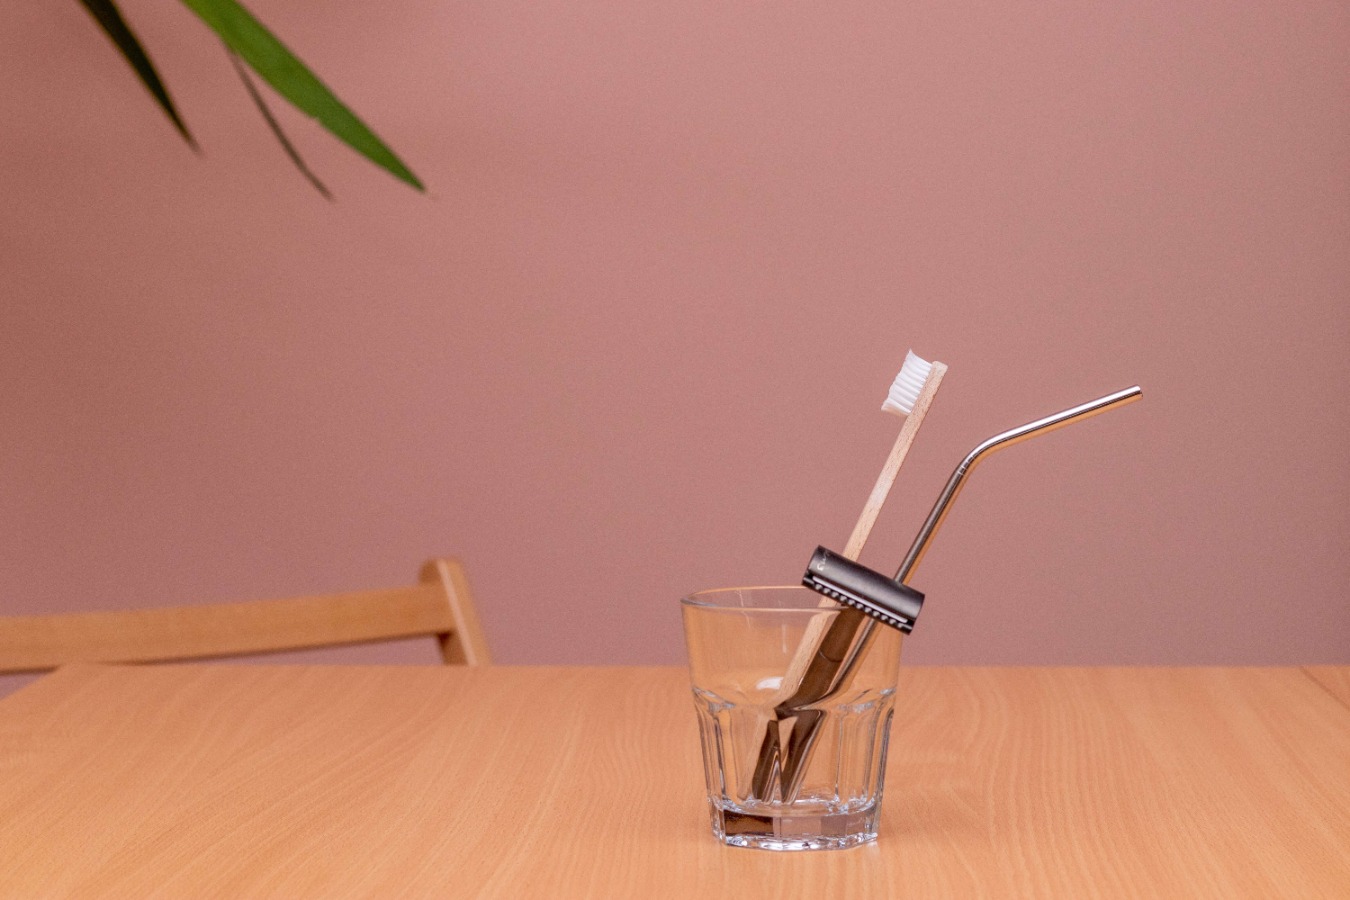 Bamboo toothbrush, safety razor and stainless steel straw in a glass